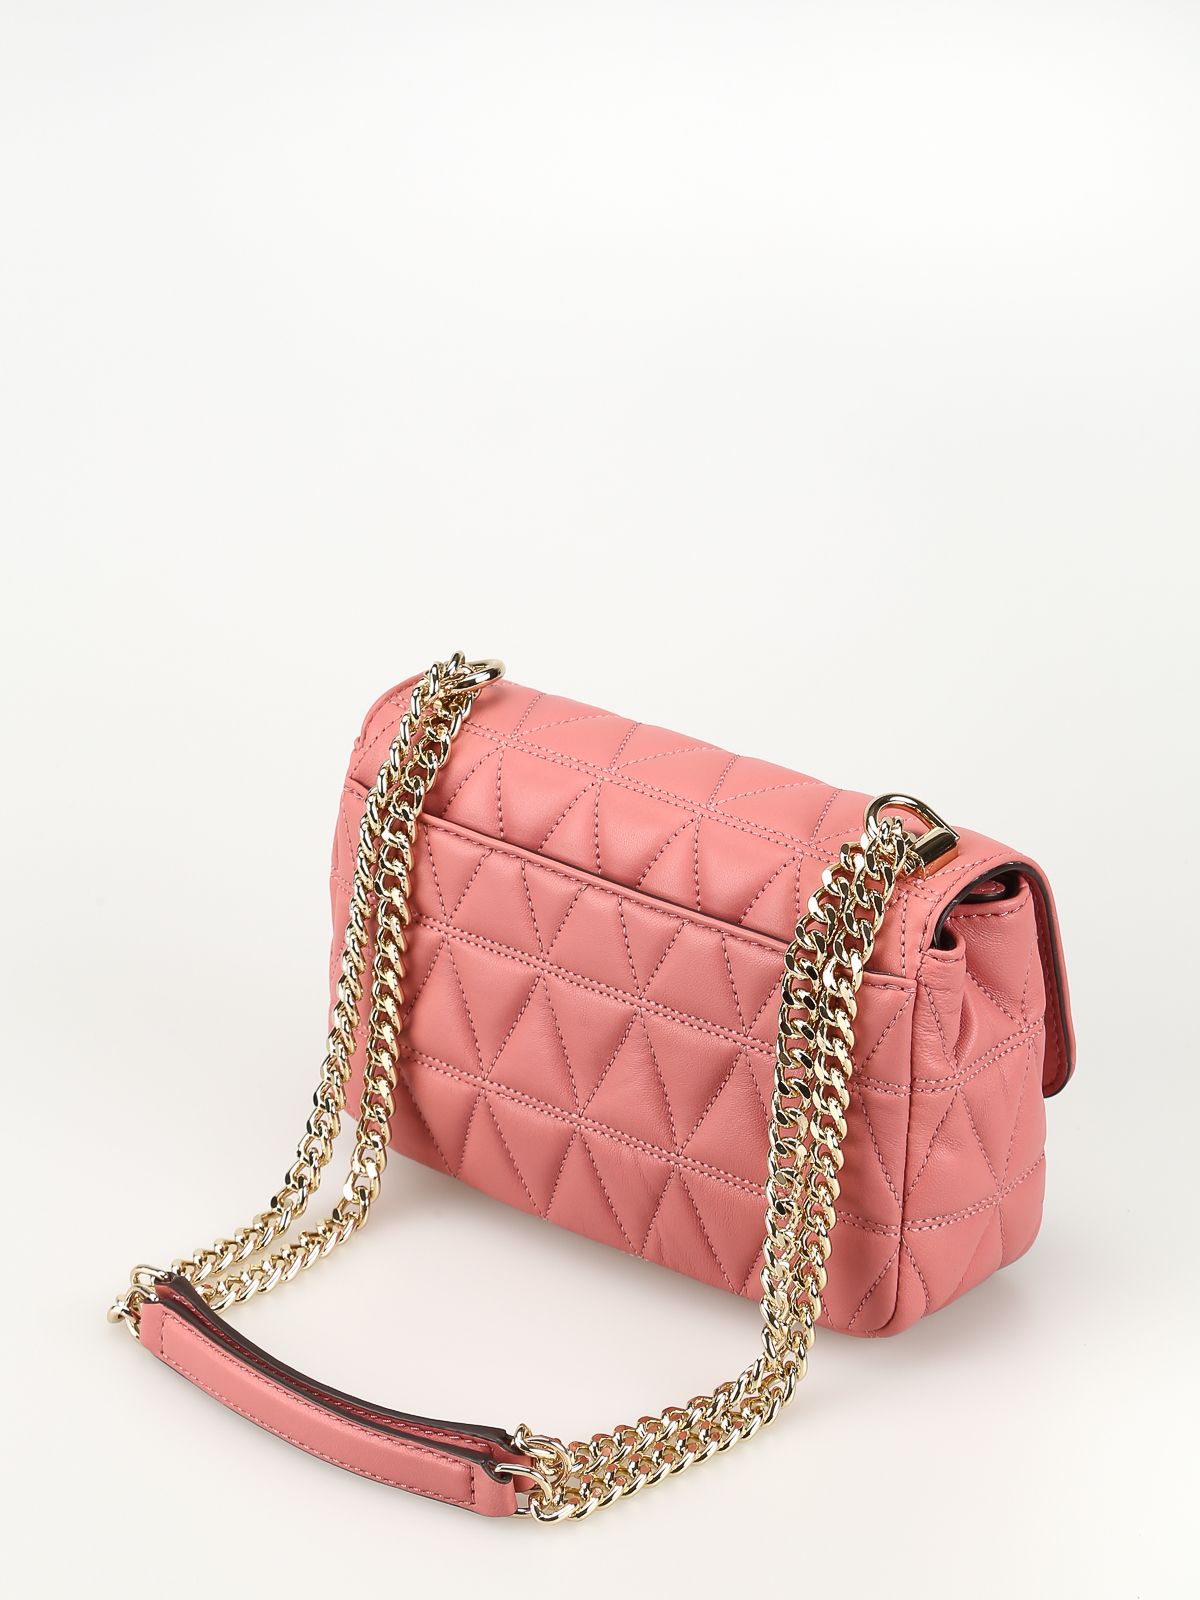 michael kors pink quilted bag